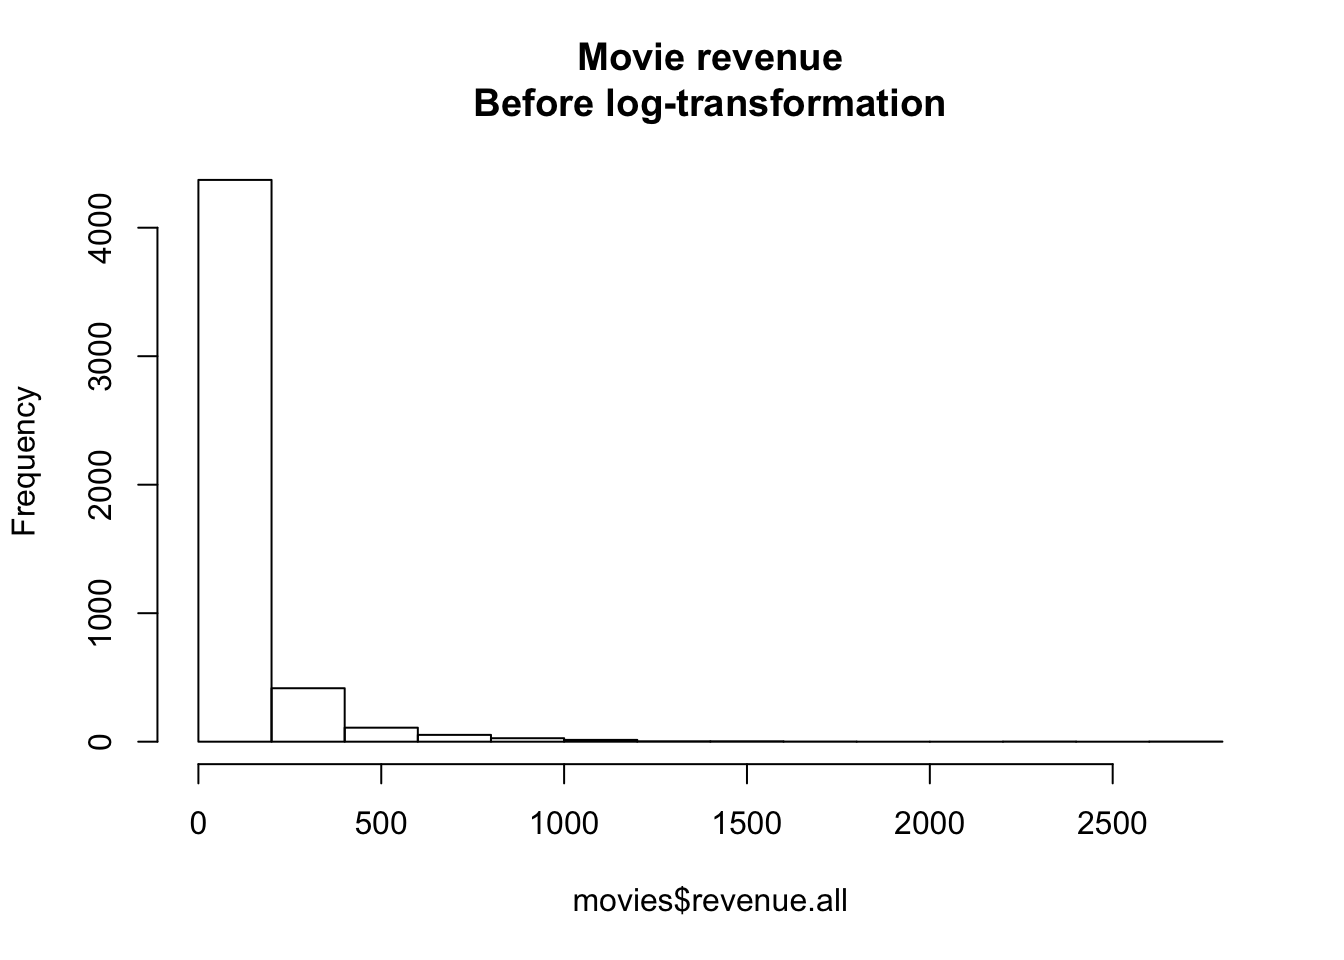 Distribution of movie revenues without a log-transformation